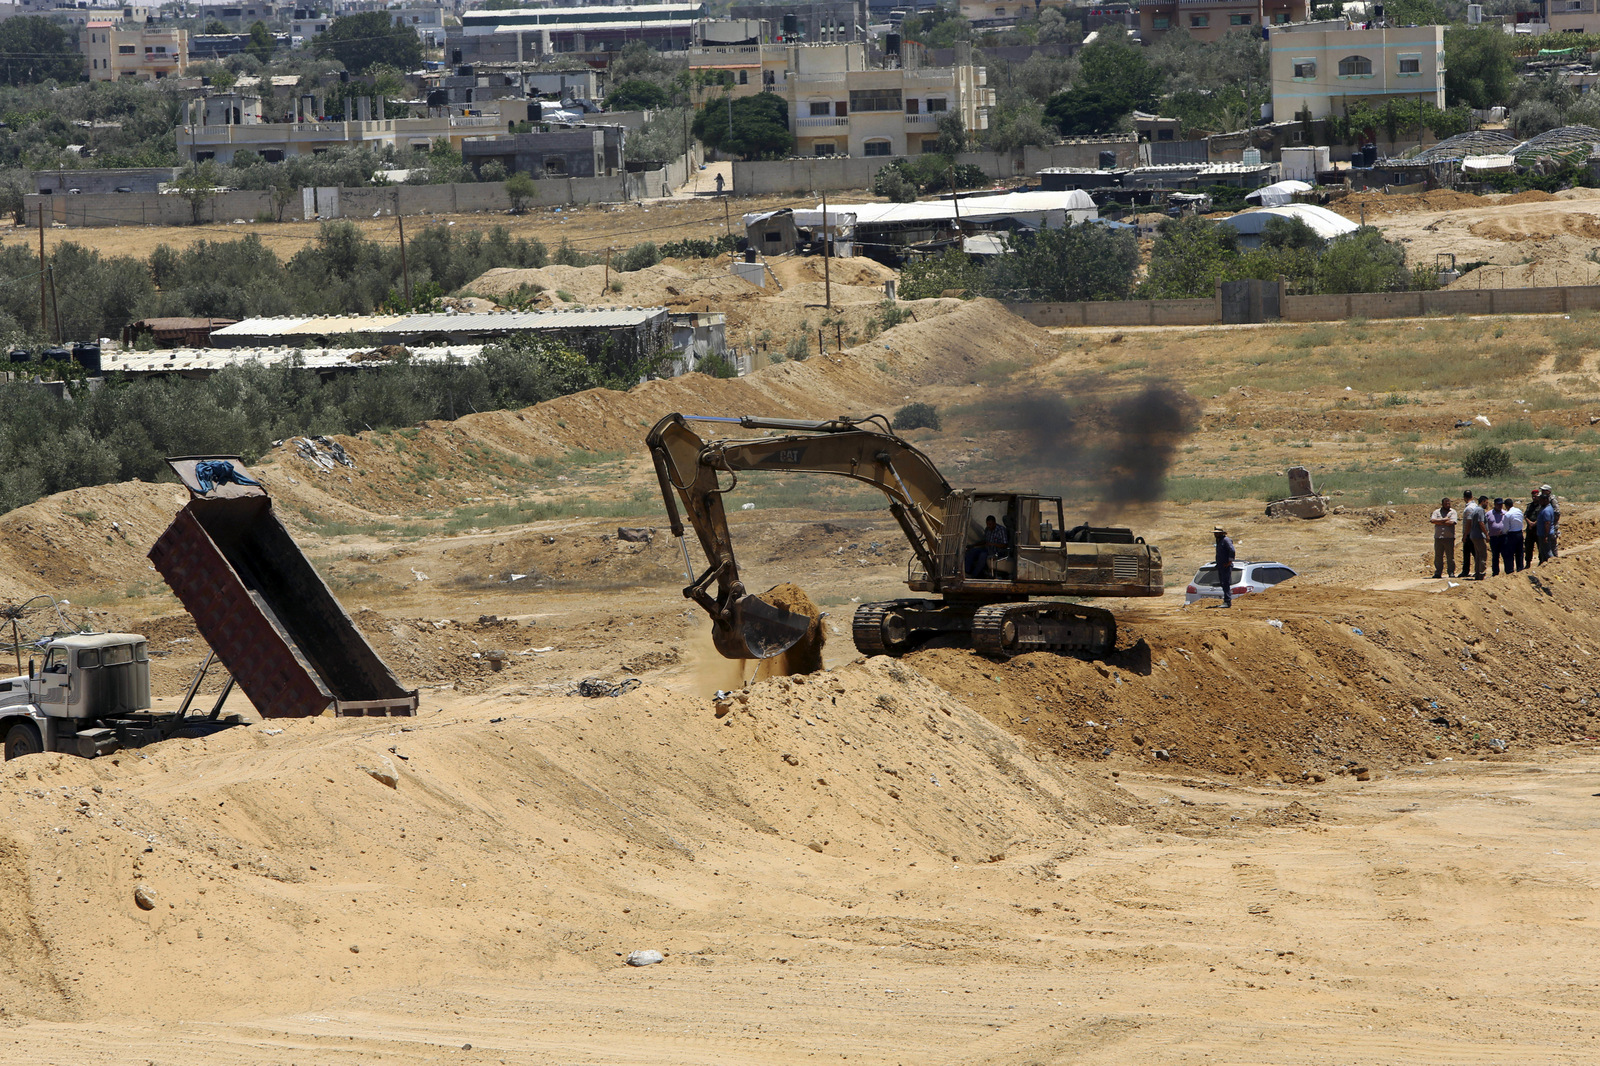 A backhoe removes sand barriers to create a buffer zone along the Egyptian border with the Gaza strip, near entrances to smuggling tunnels, background, in Rafah, June 28, 2017. (AP/Adel Hana)